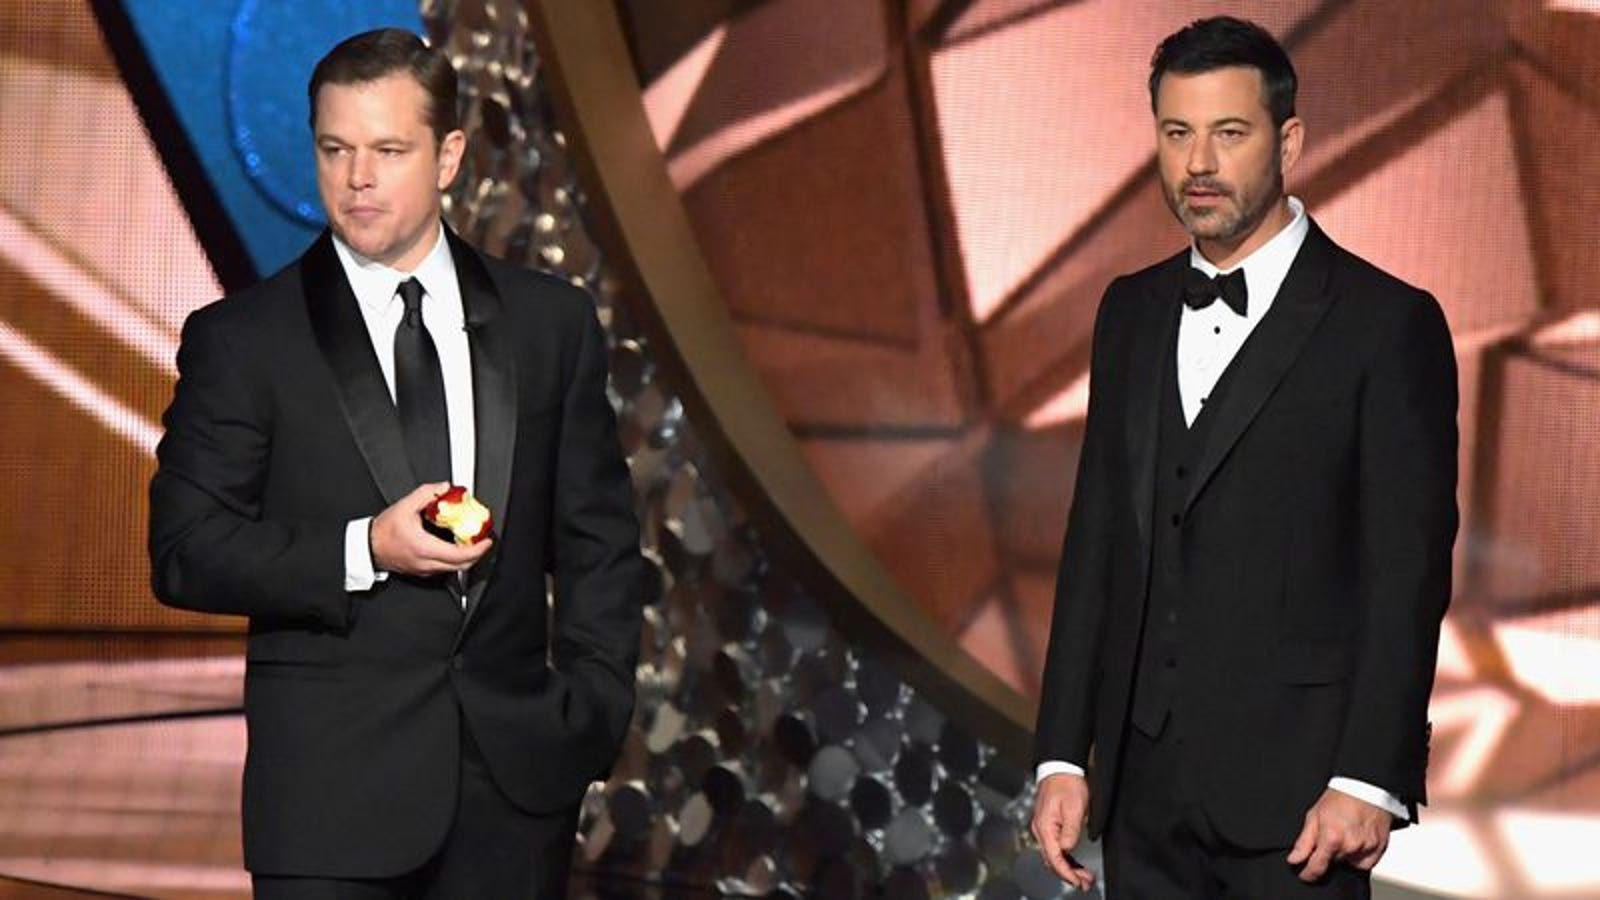 Matt Damon and Jimmy Kimmel give Emmys viewers the reference they were